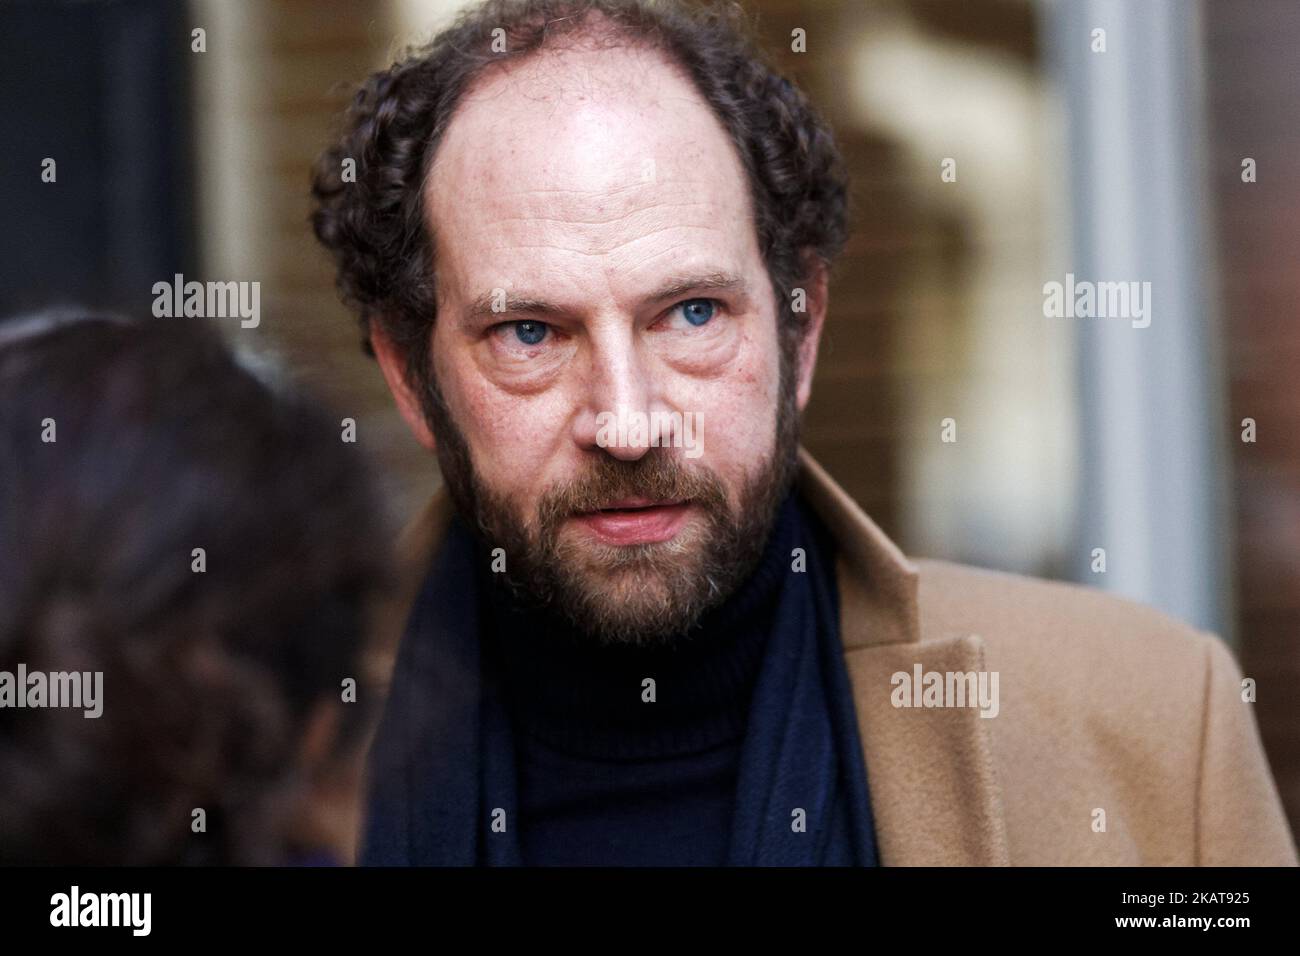 French writer Olivier Guez at the restaurant Drouant in Paris, France on November 6, 2017. Olivier Guez wins the Renaudot prize for his novel ‘La Disparition de Josef Mengele’, or ‘The Disappearance of Josef Mengele’. The Renaudot prize while not officially related to the Prix Goncourt, is a kind of complement to it, announcing its laureate at the same time and place as the Prix Goncourt, namely on the first Tuesday of November at the Drouant restaurant in Paris. (Photo by Michel Stoupak/NurPhoto) Stock Photo